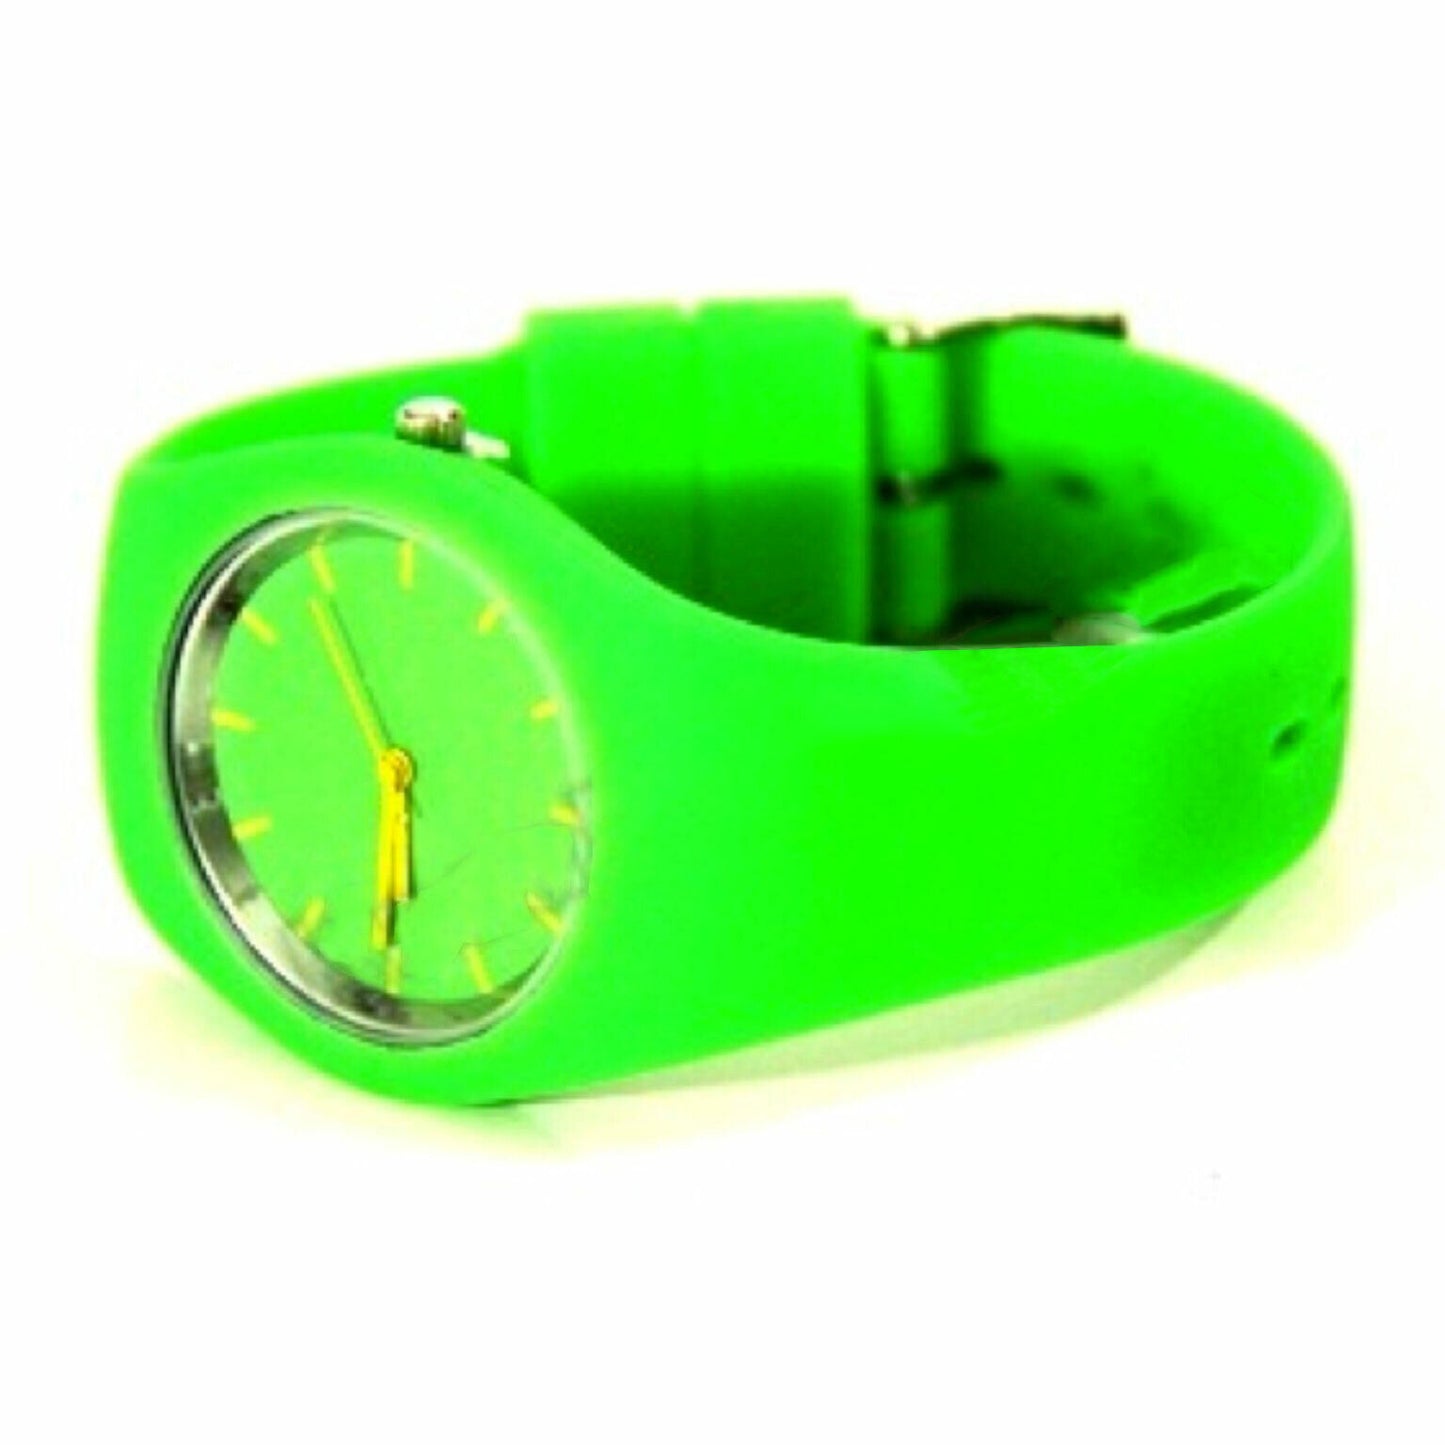 KASA Ice Cool Green Colour Wrist Watch Unisex Ladies Men's Silicone Free Shipping